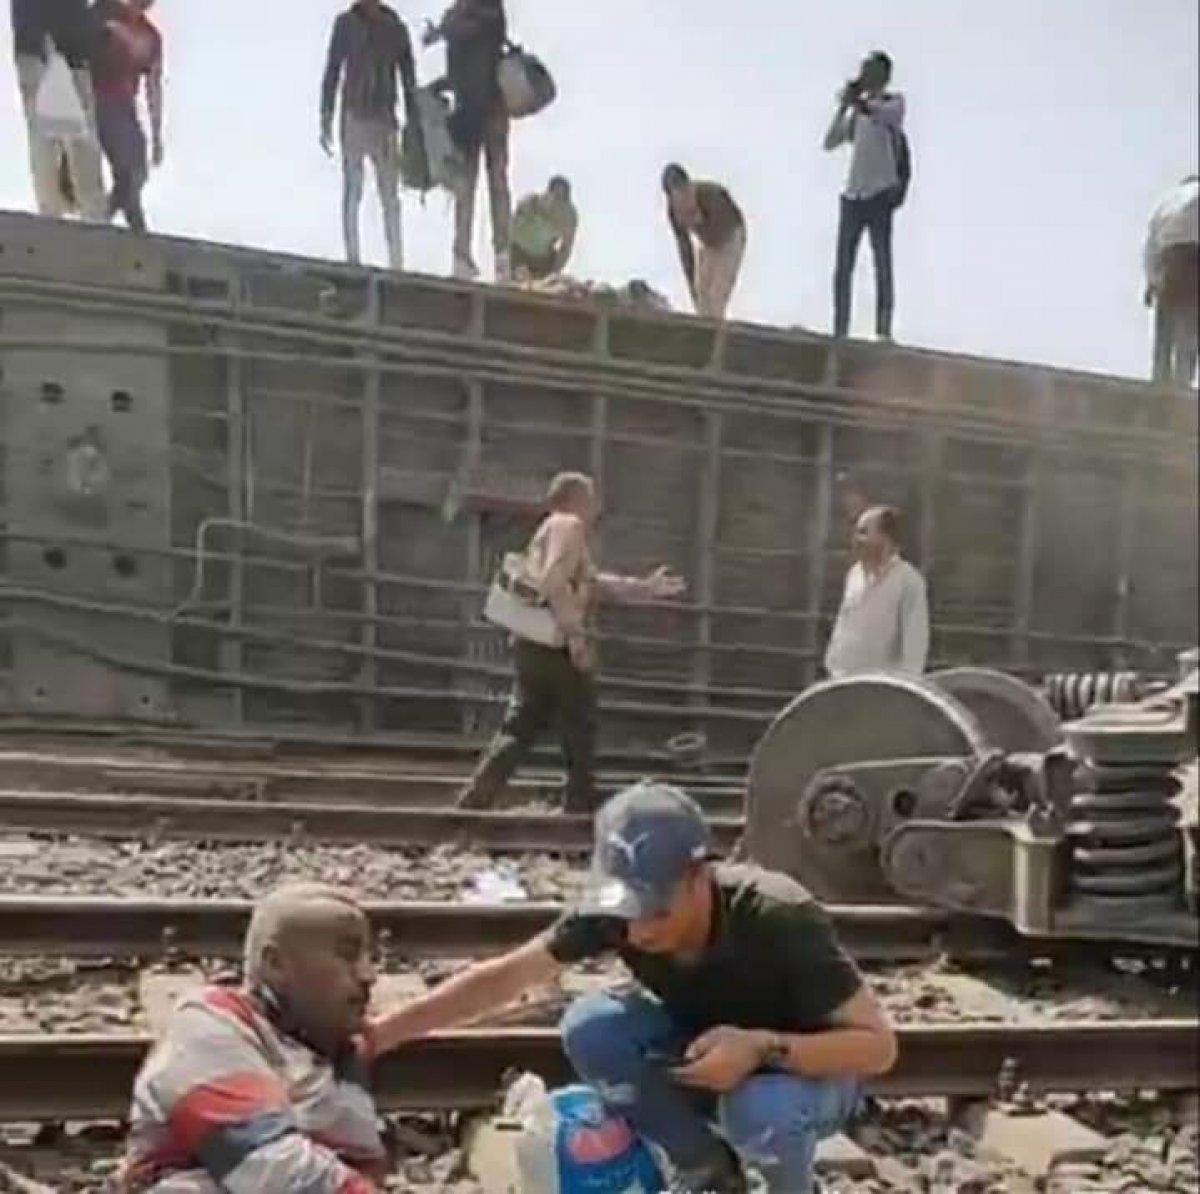 Train accident in Egypt #4